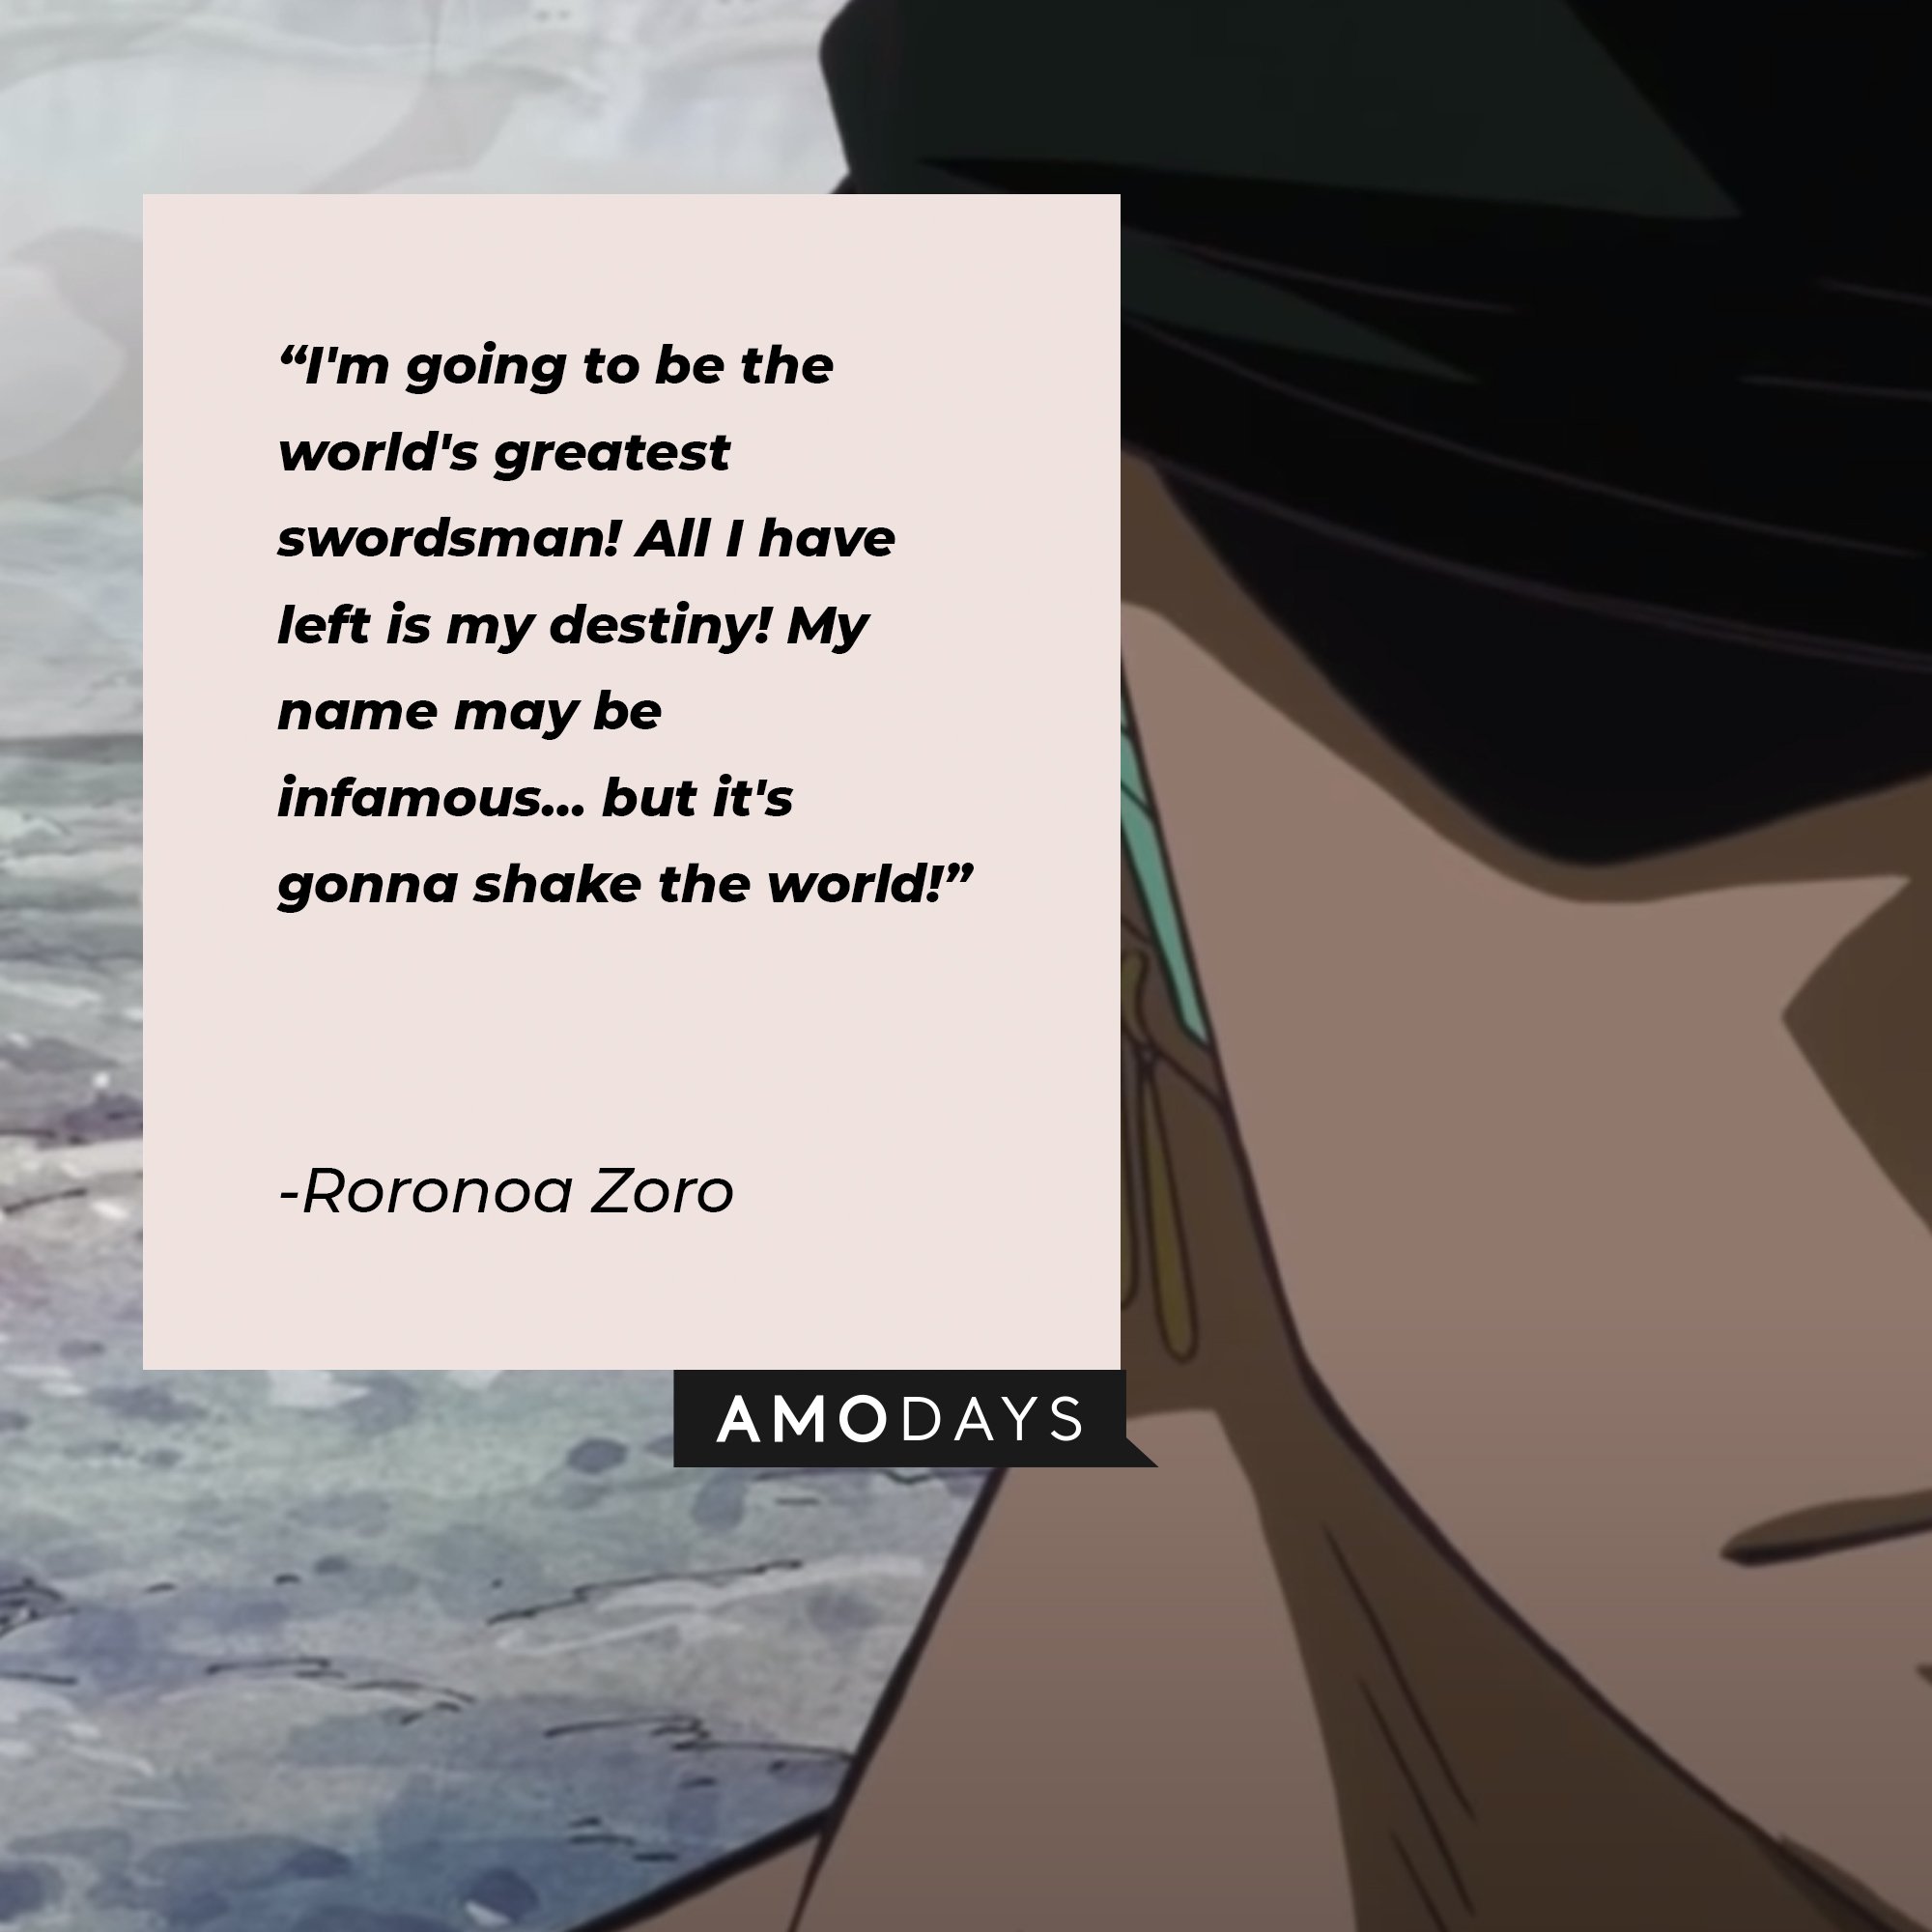 Roronoa Zoro’s quote: "'I'm going to be the world's greatest swordsman! All I have left is my destiny! My name may be infamous… but it's gonna shake the world!" | Image: AmoDays